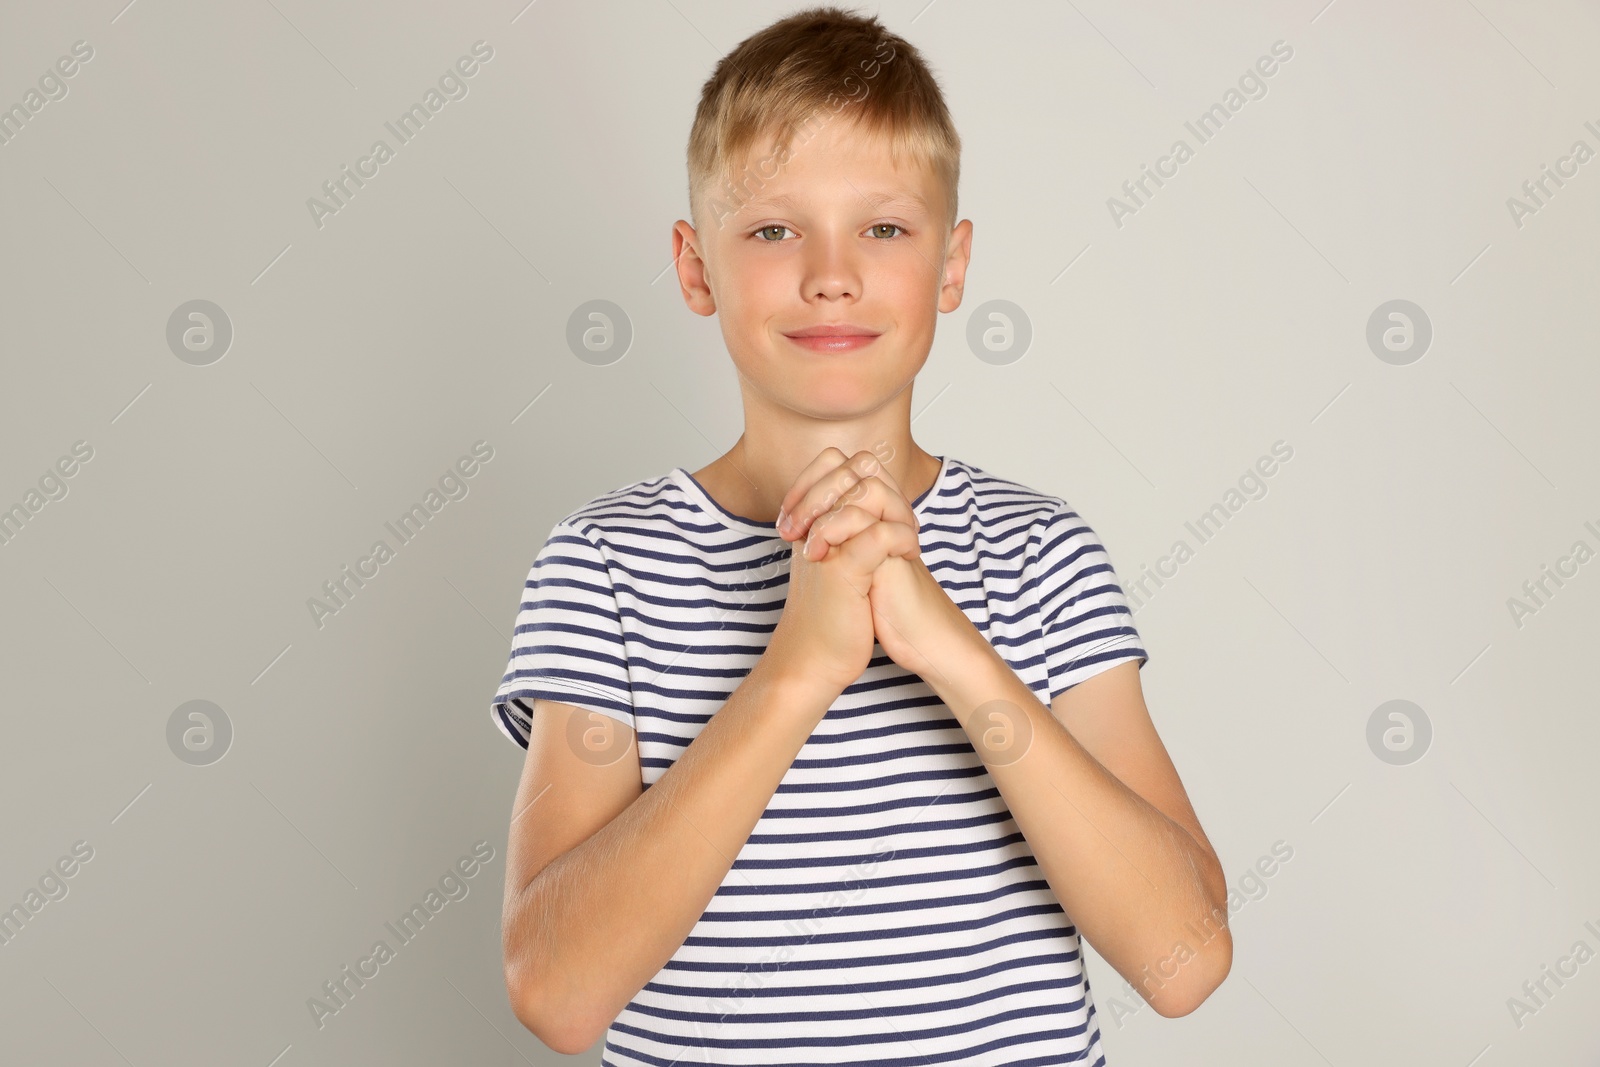 Photo of Boy with clasped hands praying on light grey background